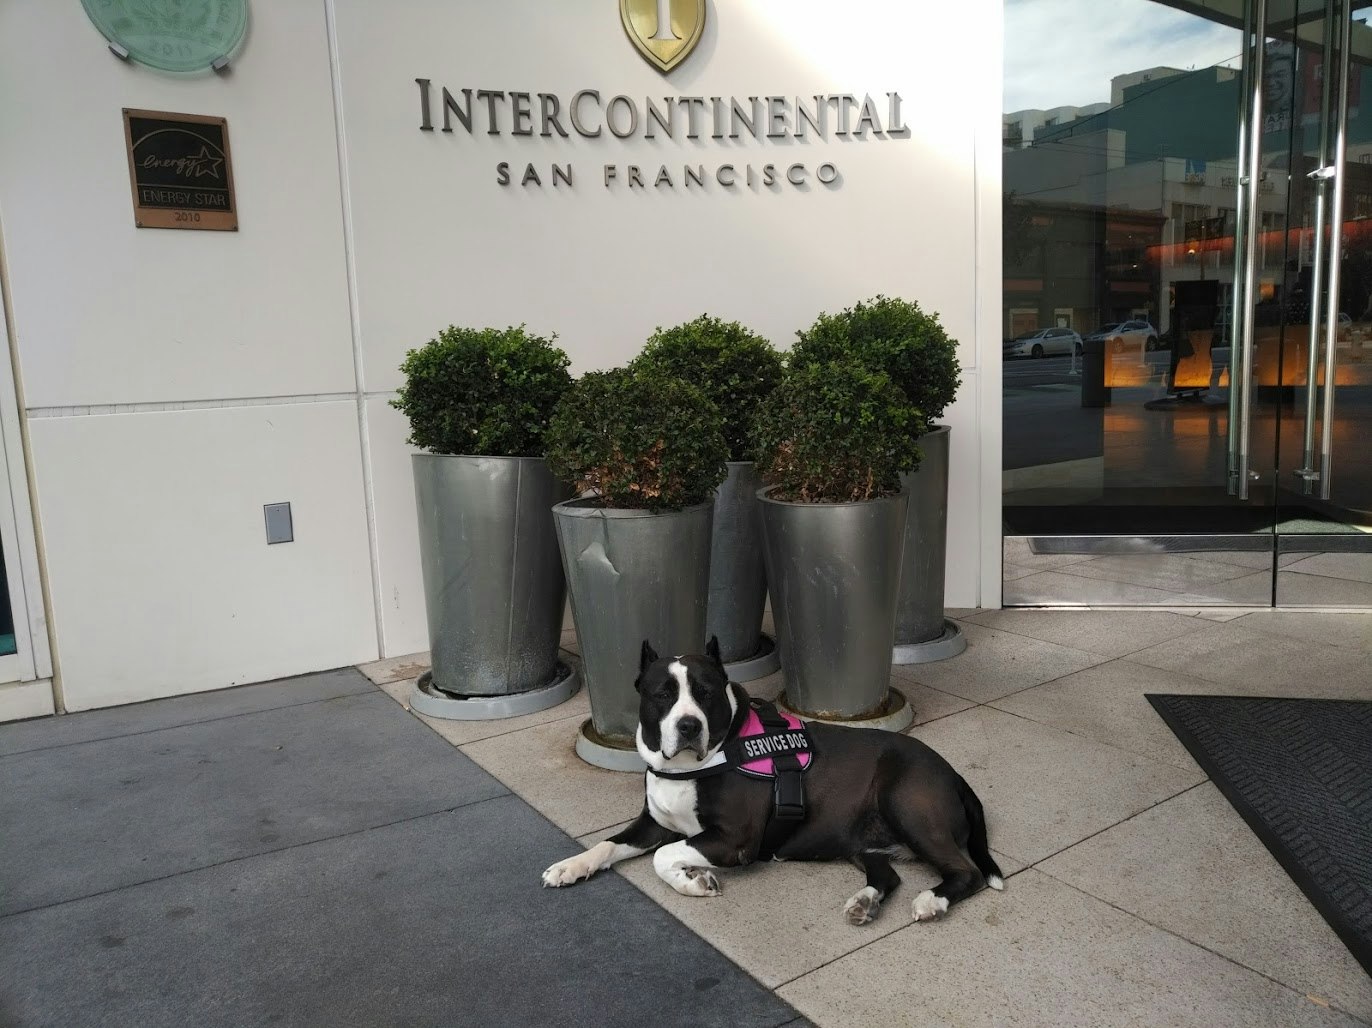 A dog in a "Service Animal" harness sits in front of the Intercontinental San Francisco sign